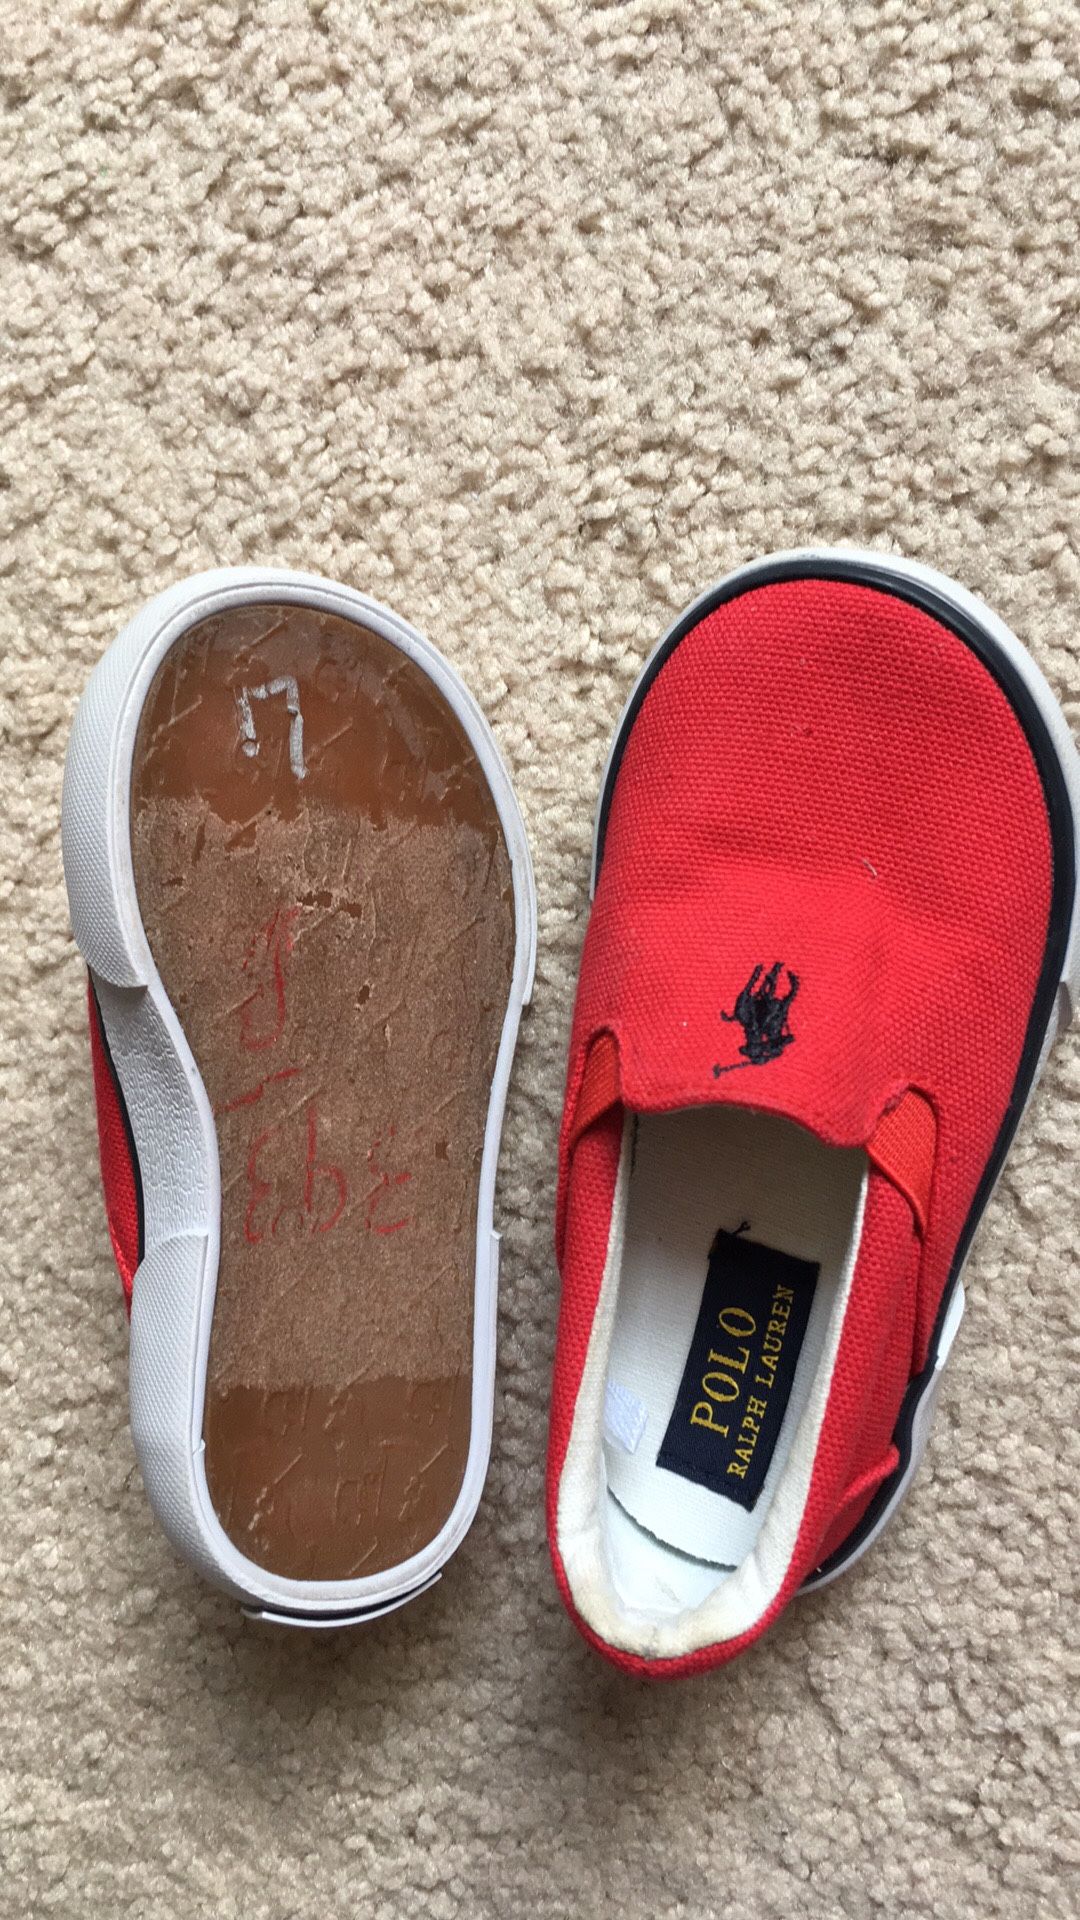 Toddler polo shoes size 7